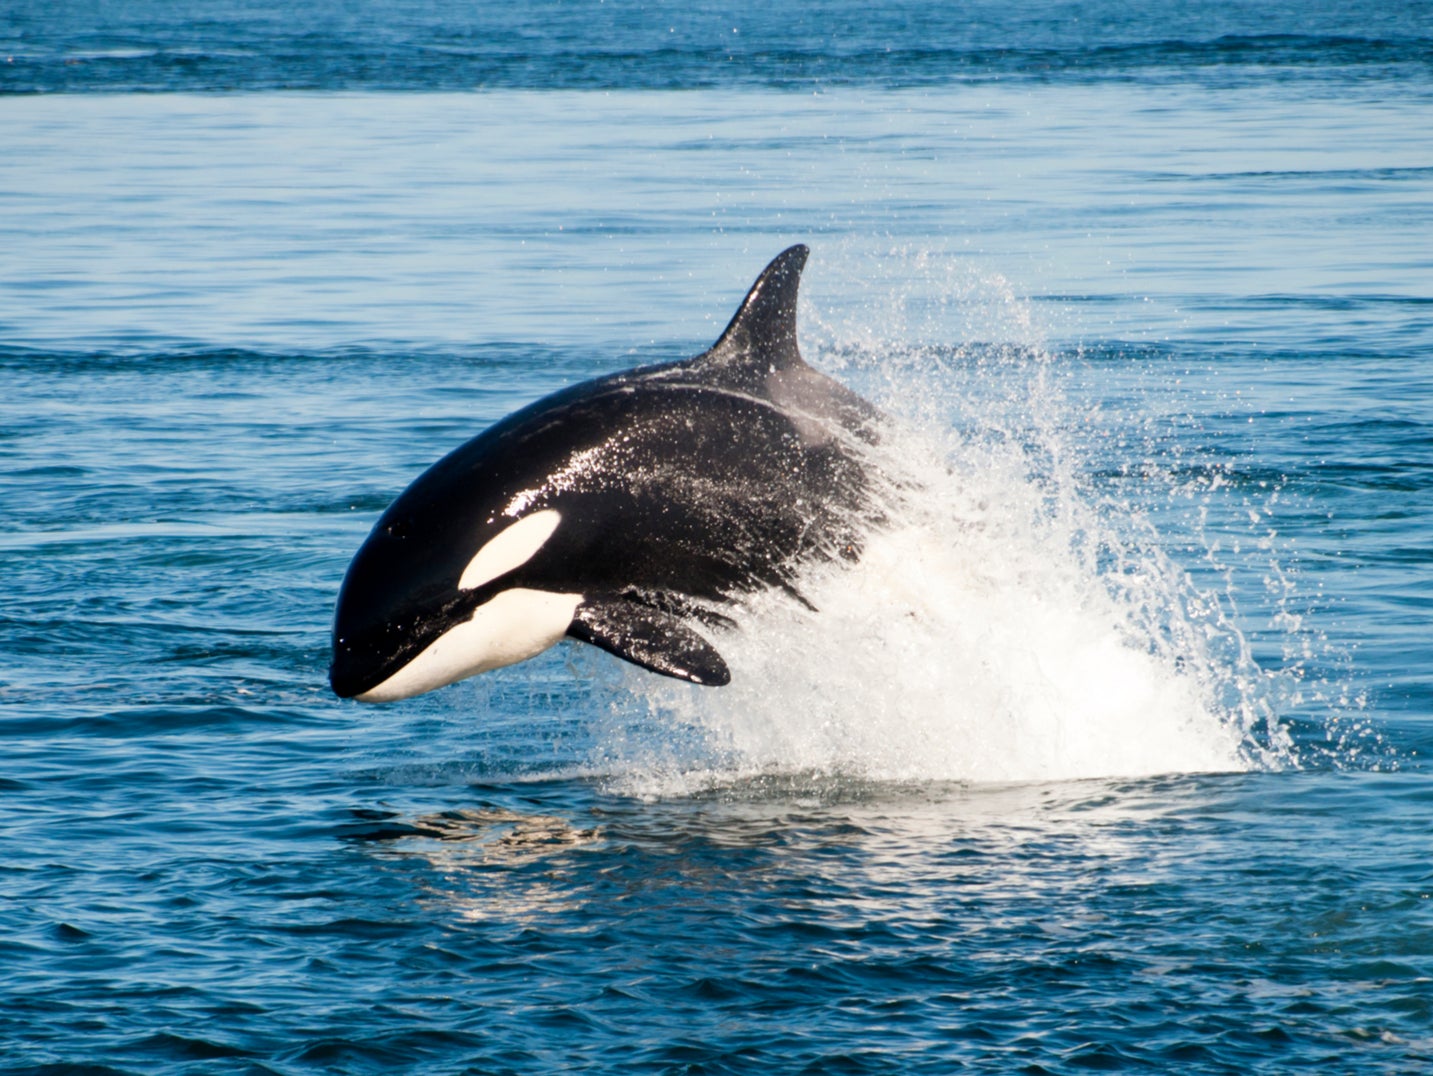 Having male children makes killer whales less likely to have more offspring, researchers say